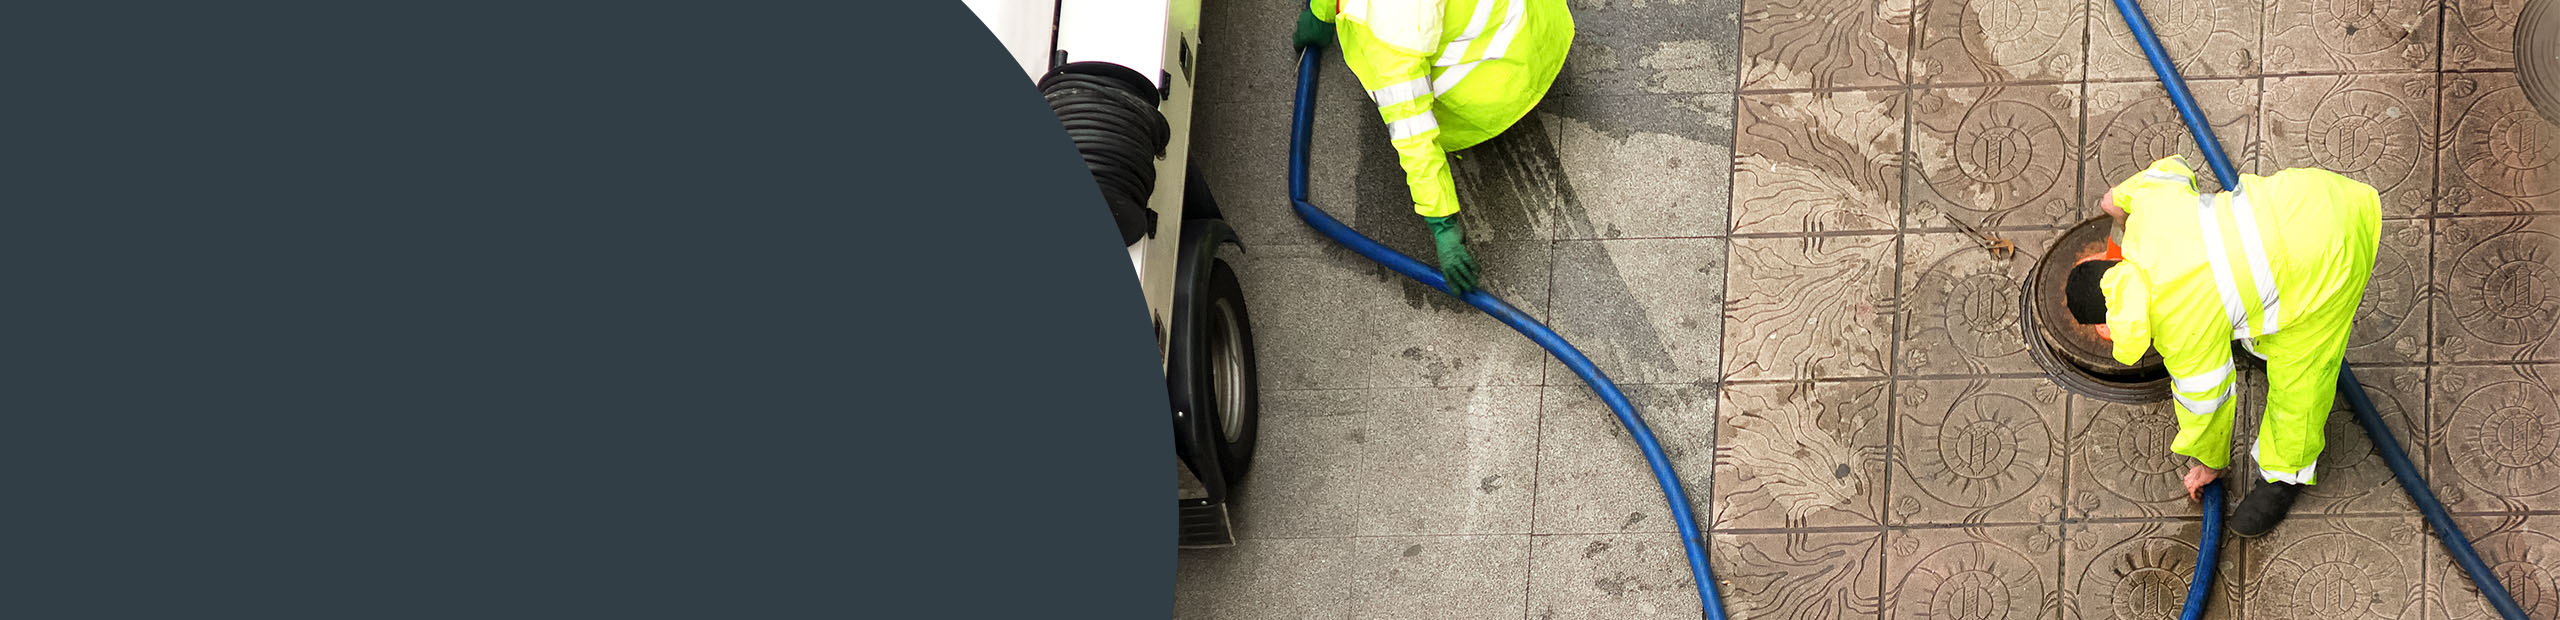 Drainage Services Waltham Forest